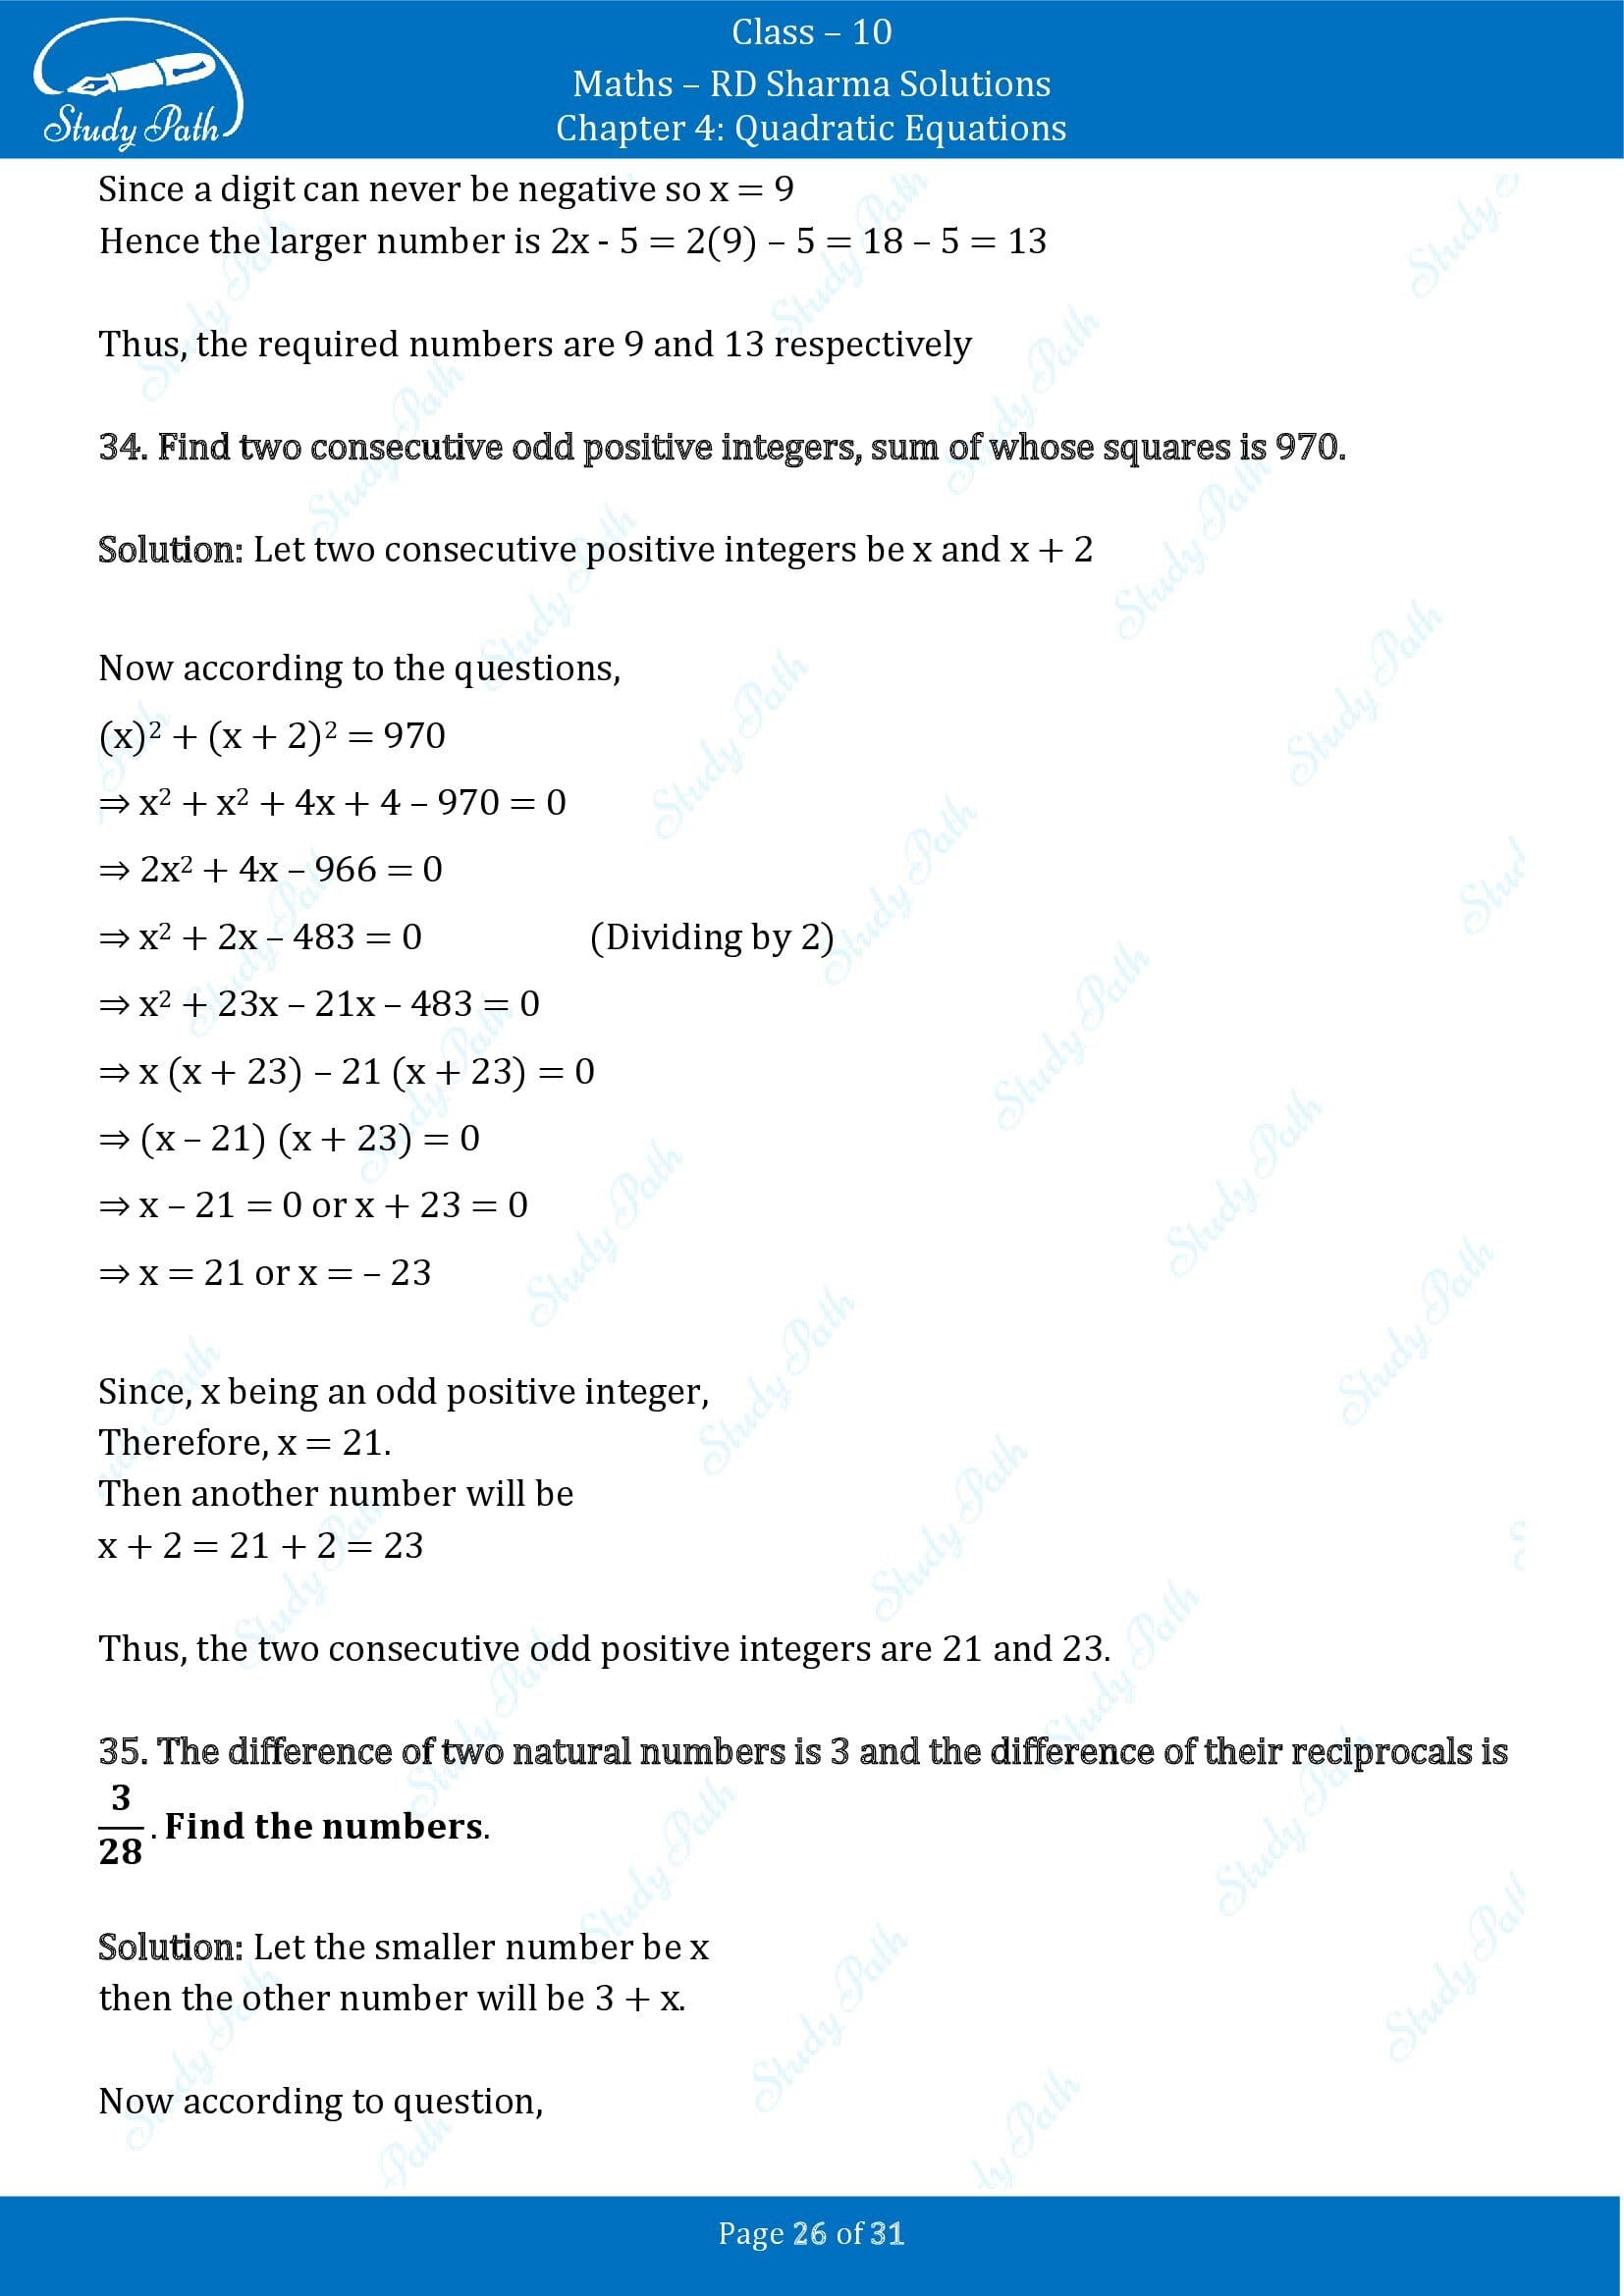 RD Sharma Solutions Class 10 Chapter 4 Quadratic Equations Exercise 4.7 00026